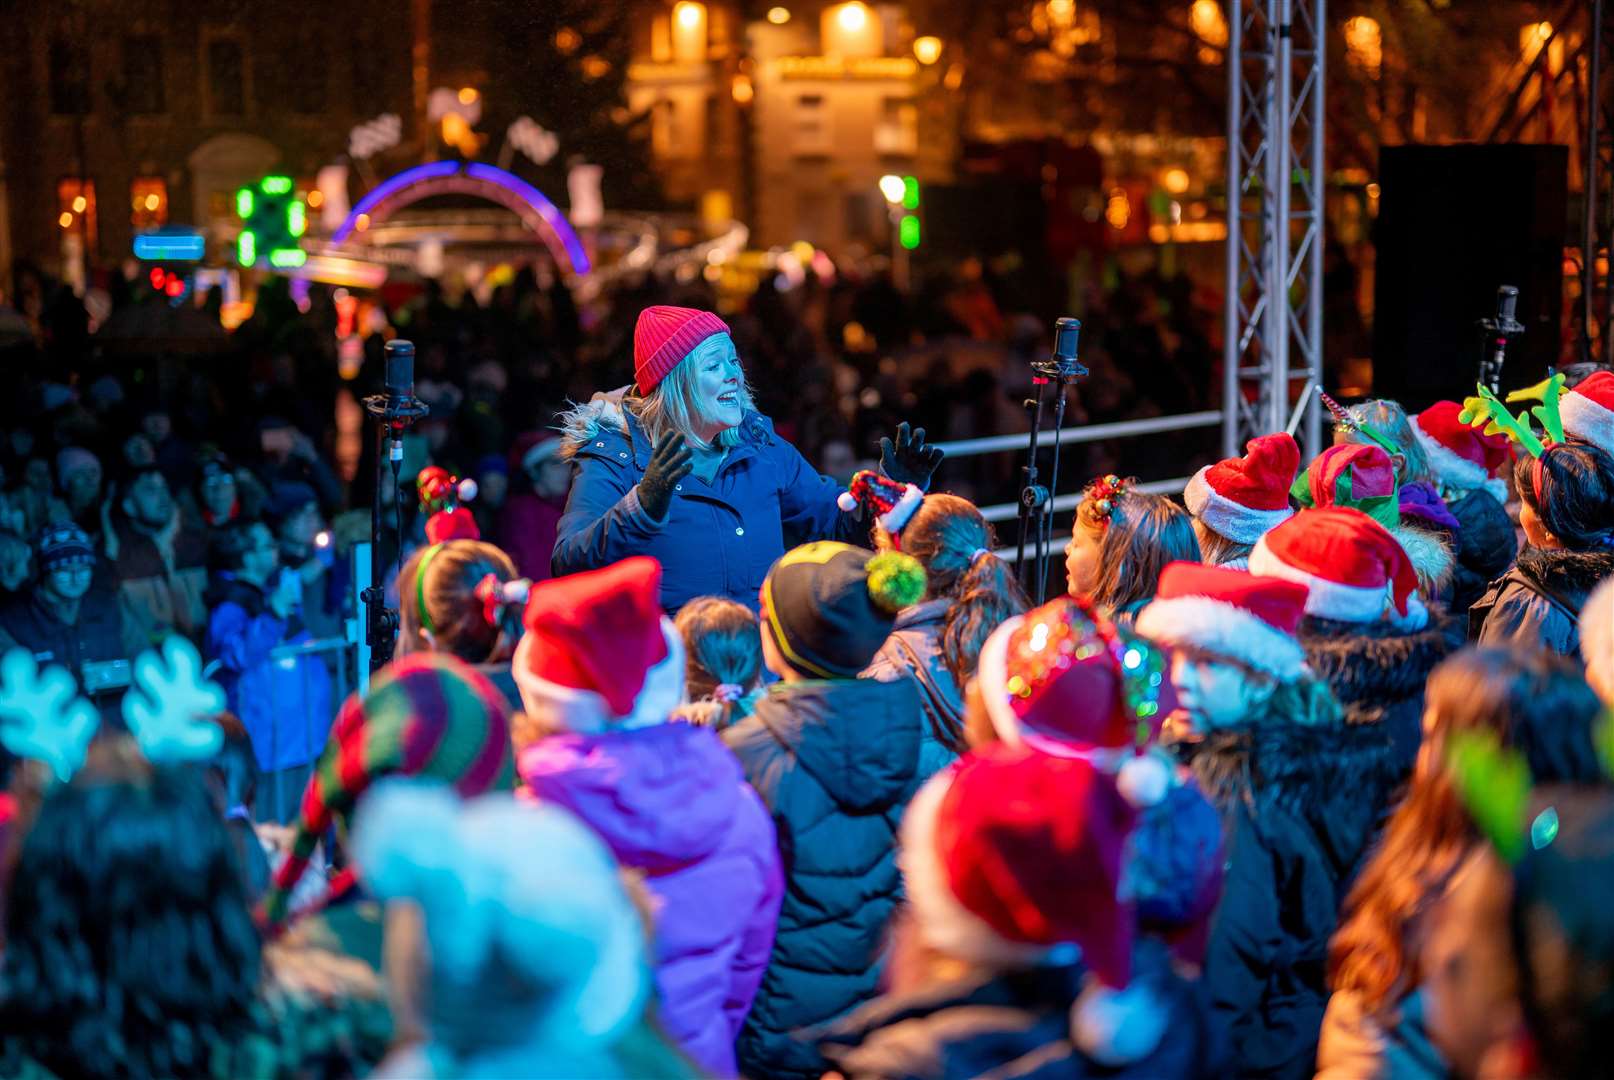 King's Lynn Christmas light switch-on. Pictures: Matthew Usher/West Norfolk Council